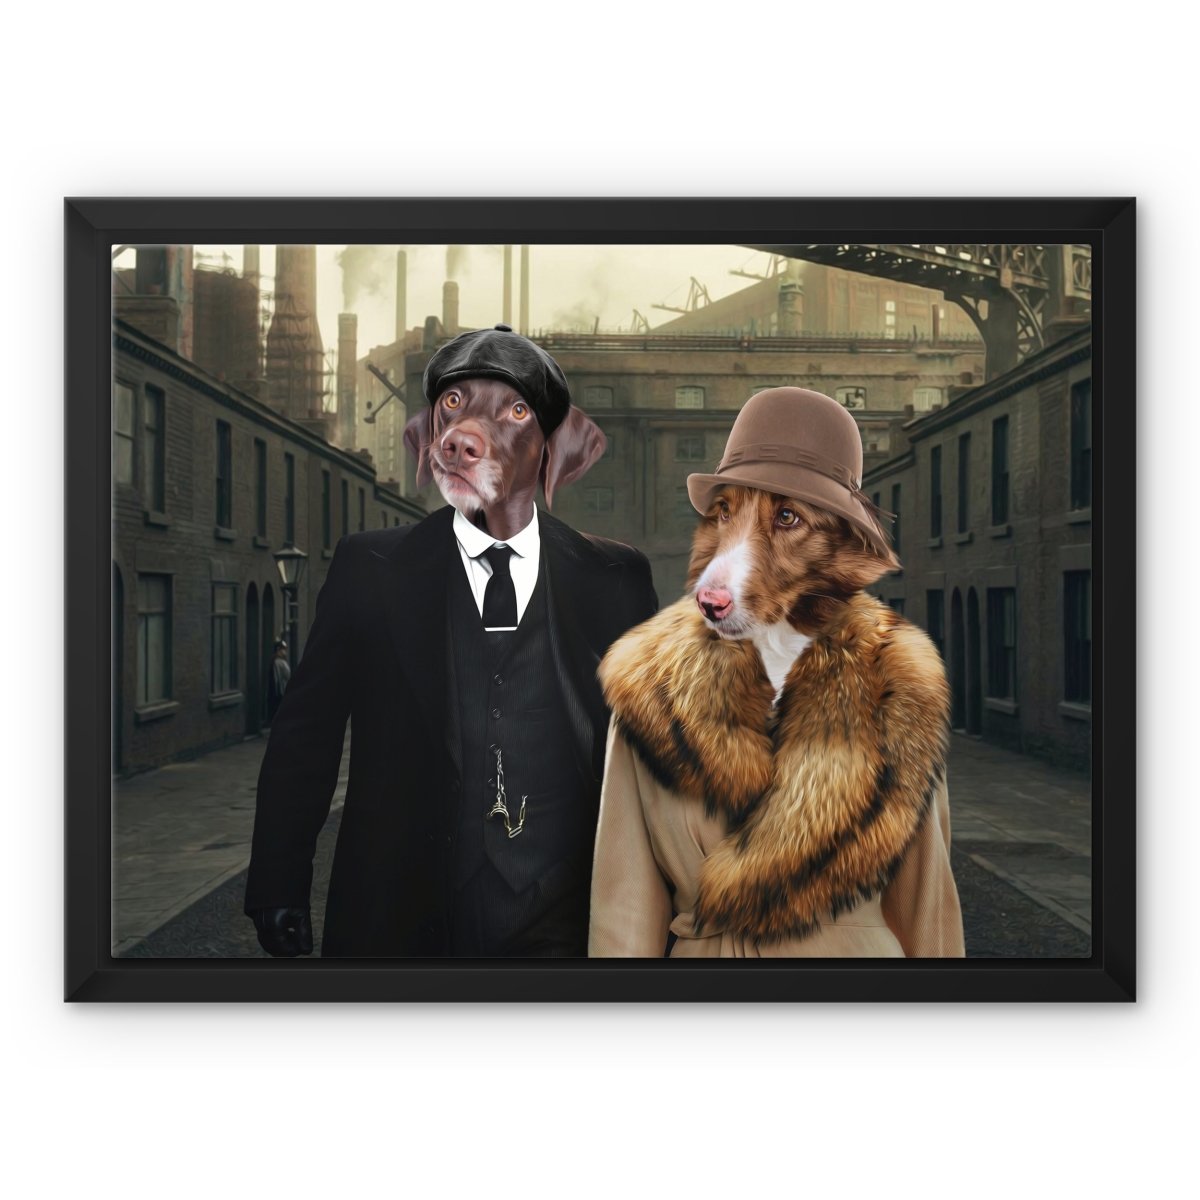 Peaky Blinders Male & Female: Custom Pet Canvas - Paw & Glory - #pet portraits# - #dog portraits# - #pet portraits uk#paw and glory, custom pet portrait canvas,custom dog canvas art, dog wall art canvas, canvas of your dog, dog picture canvas, dog prints on canvas